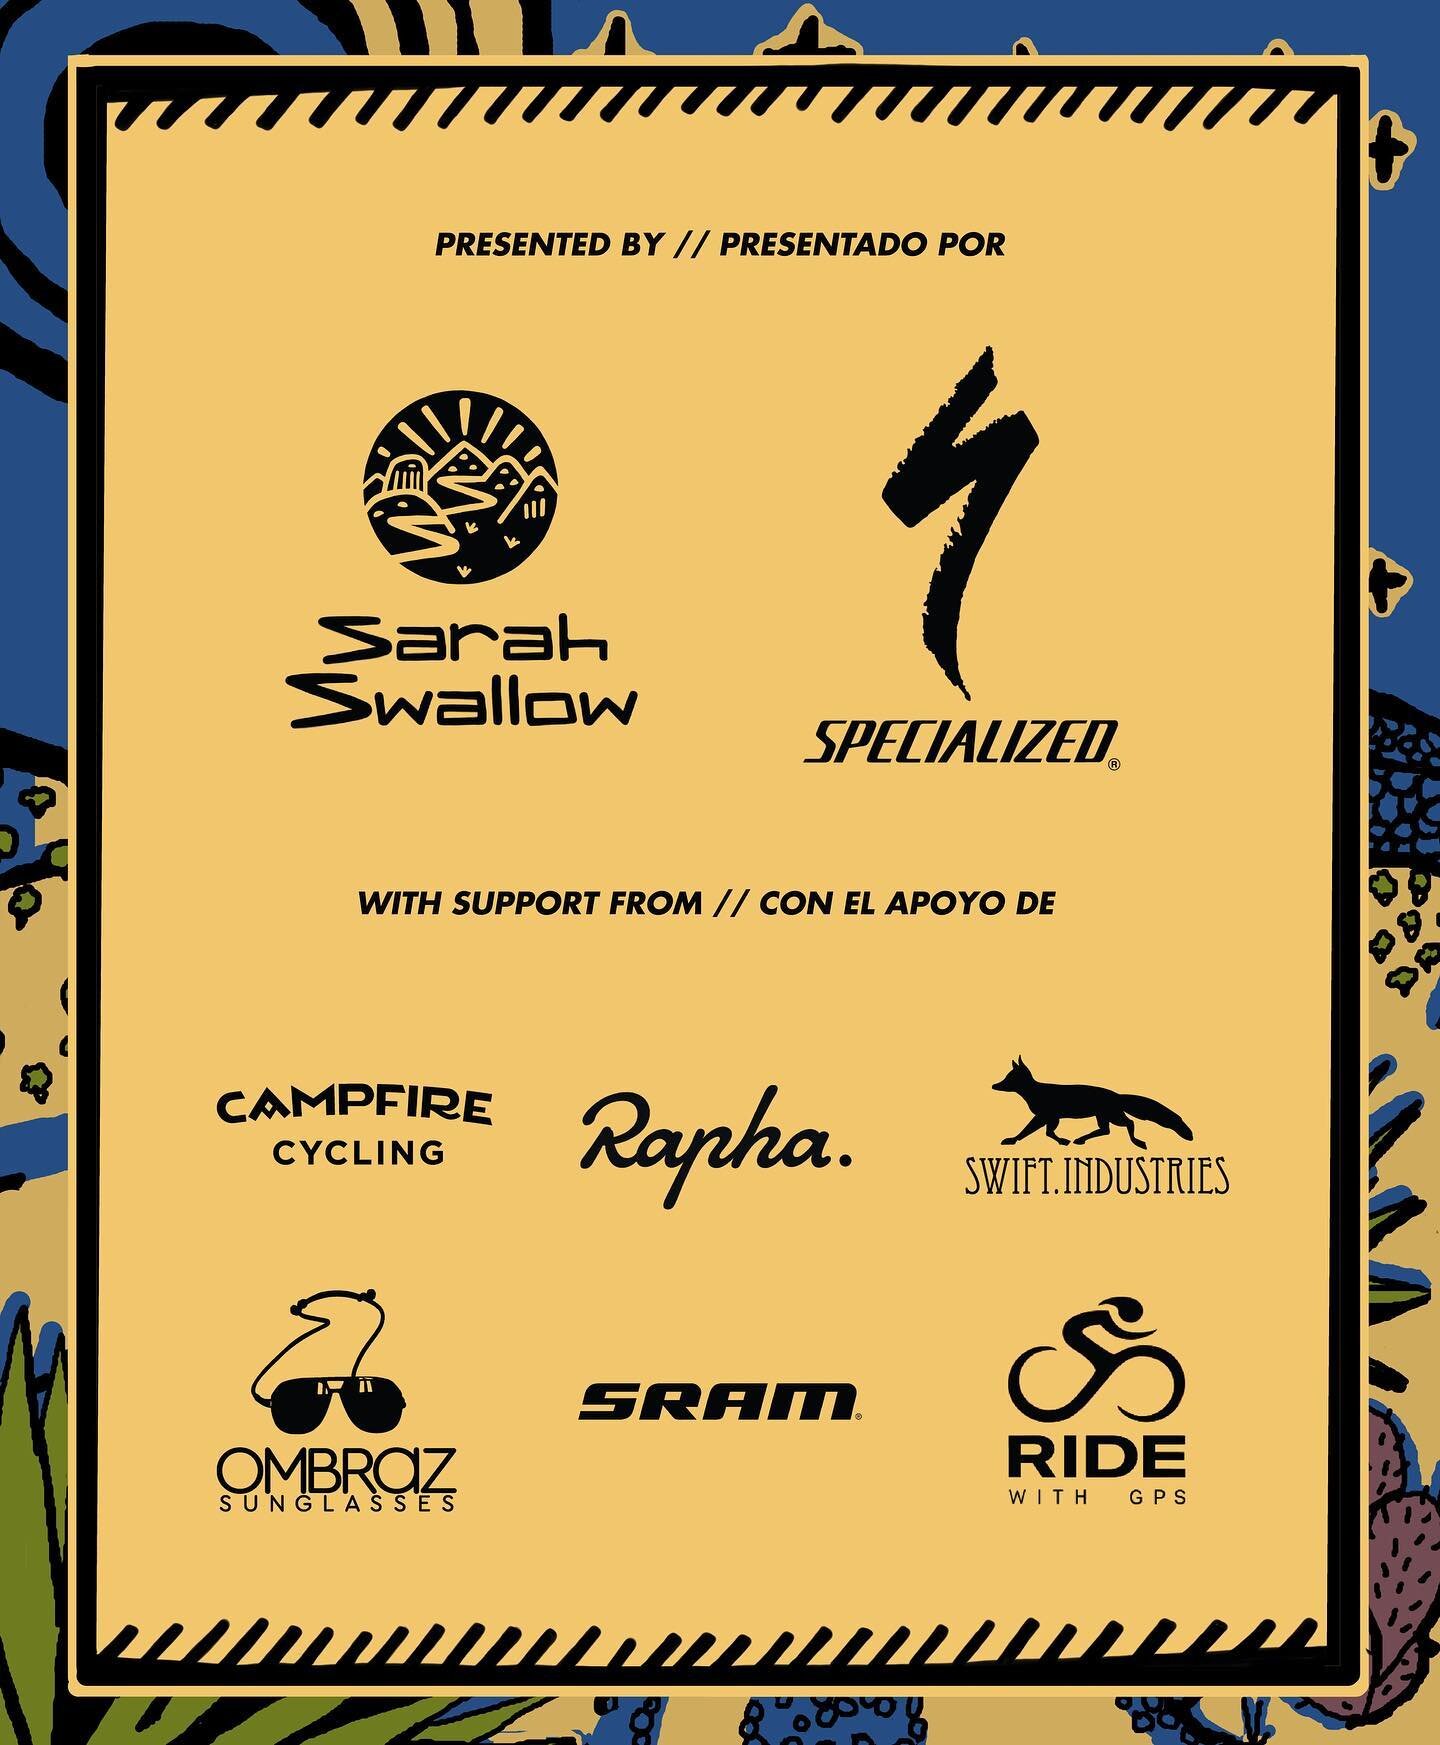 Industry partners are integral to #rutadeljefe .

The support from @iamspecialized , @campfirecycling , @ombraz , @rapha_n_america , @ridewithgps , @sramroad , and @swiftindustries cover many of the essential operating expenses that allow us to offer